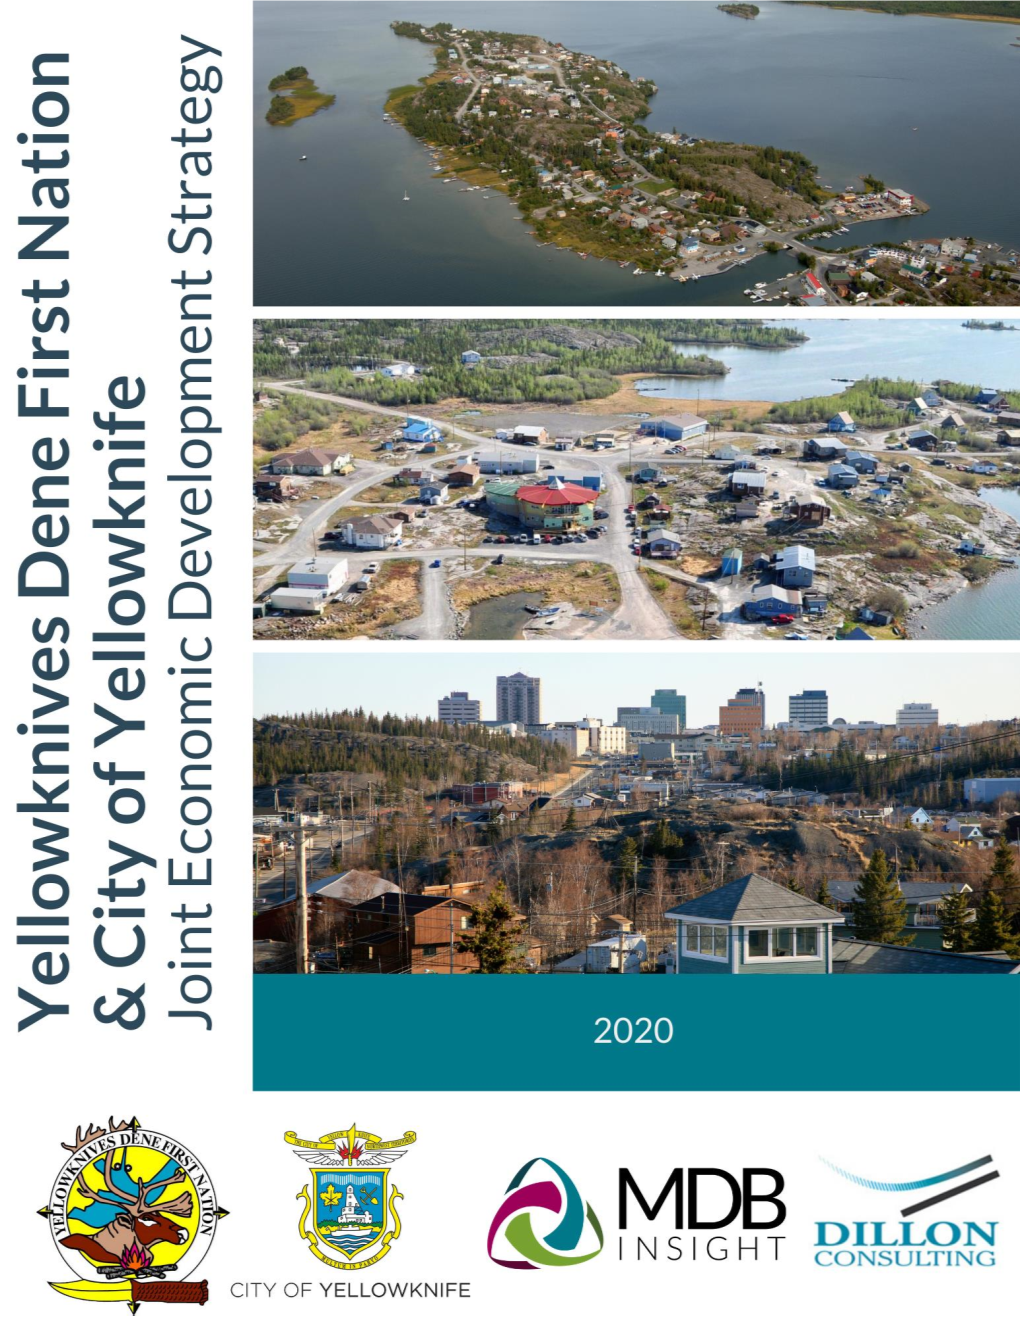 YKDFN and the City of Yellowknife Joint Economic Development Strategy Page I